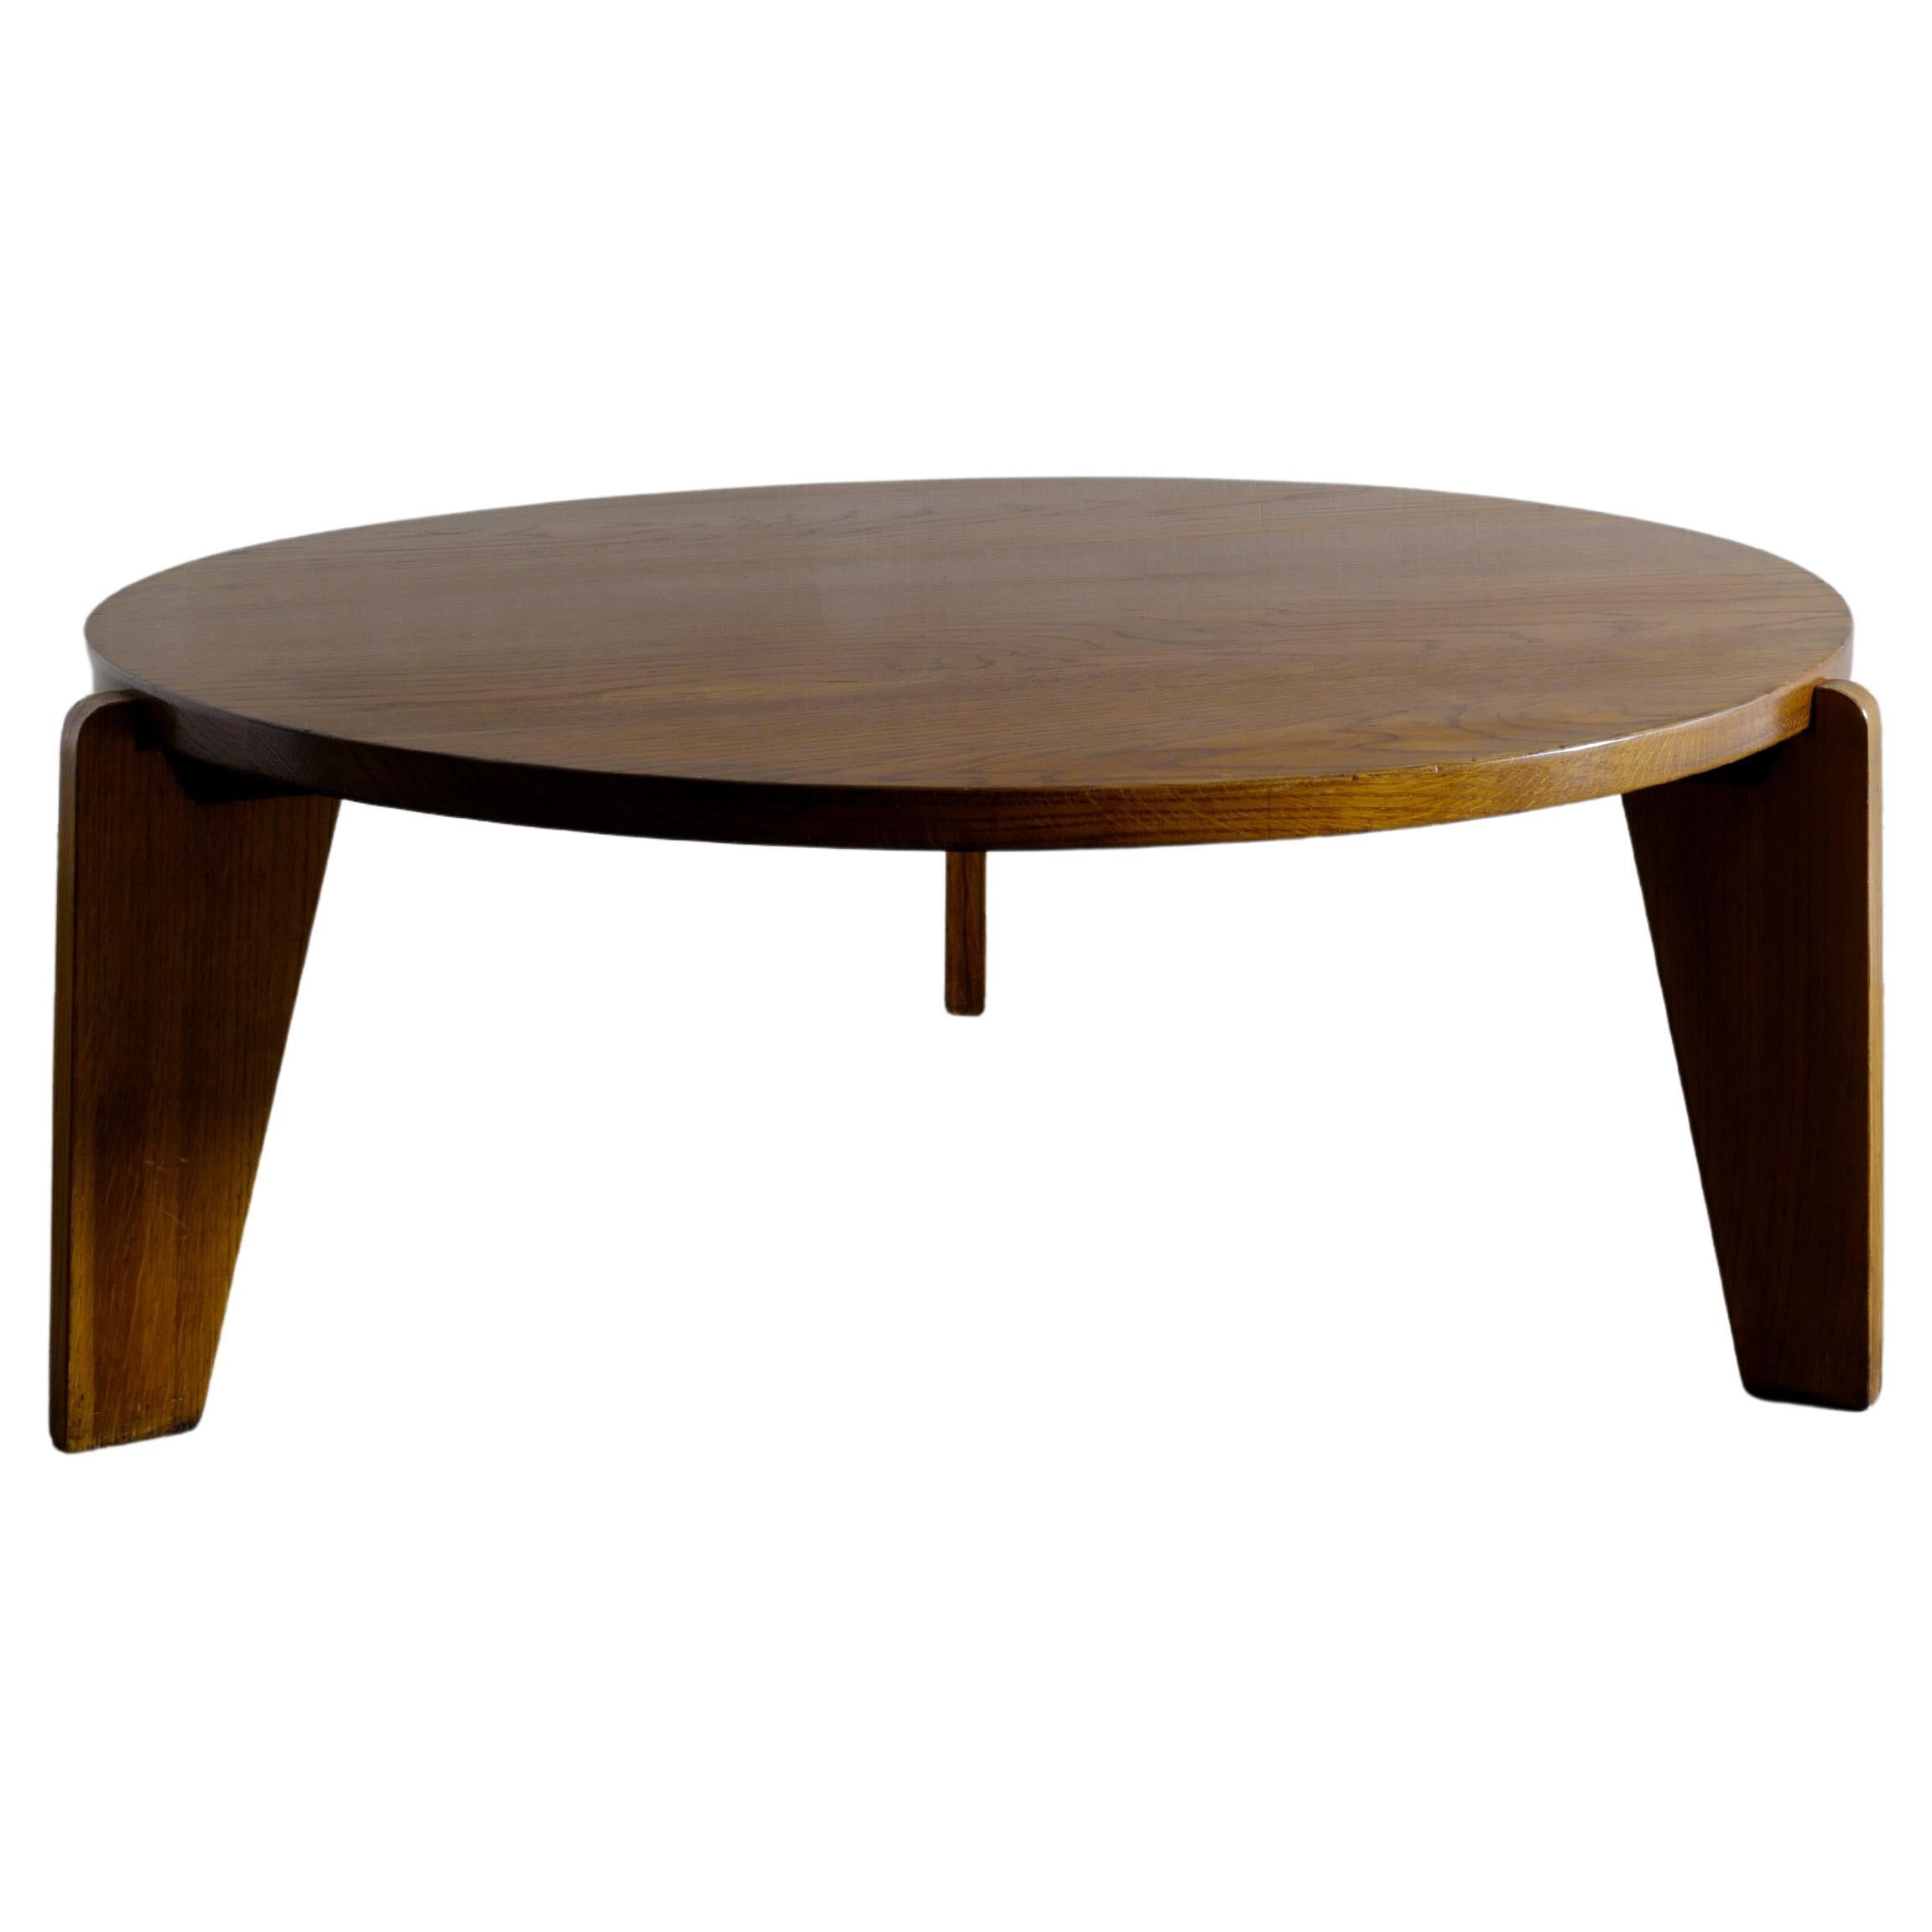 Coffee Table in style of Jean Prouvé "Guéridon Bas" Produced in France,  1950s at 1stDibs